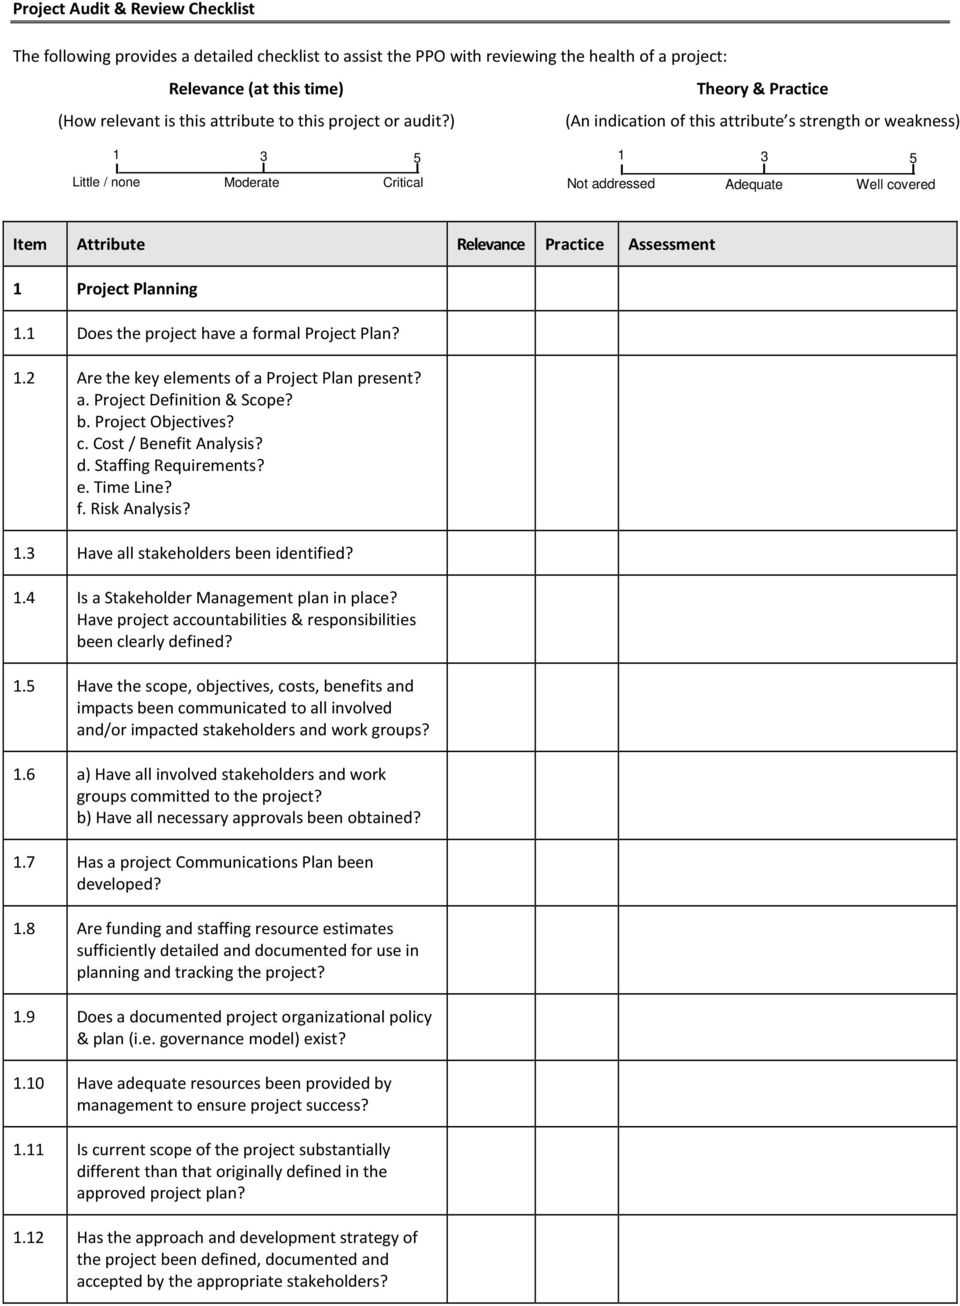 Project Health Checklist Of Key Parameters G Mining Download With Regard To Health Check Report Template